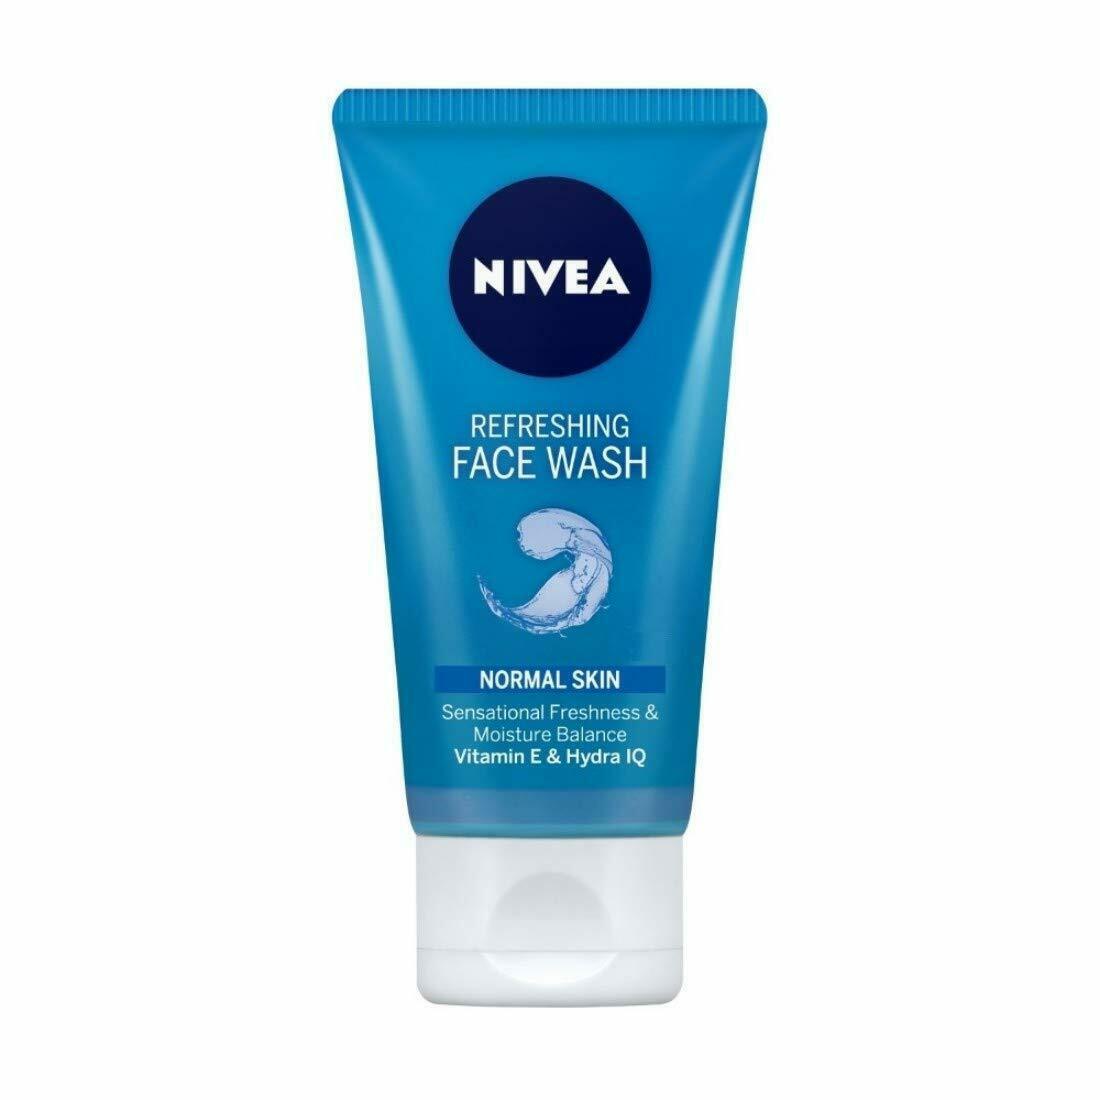 NIVEA Women Refreshing Face Wash, with Vitamin E, 150ml (Pack of 1) - $9.40